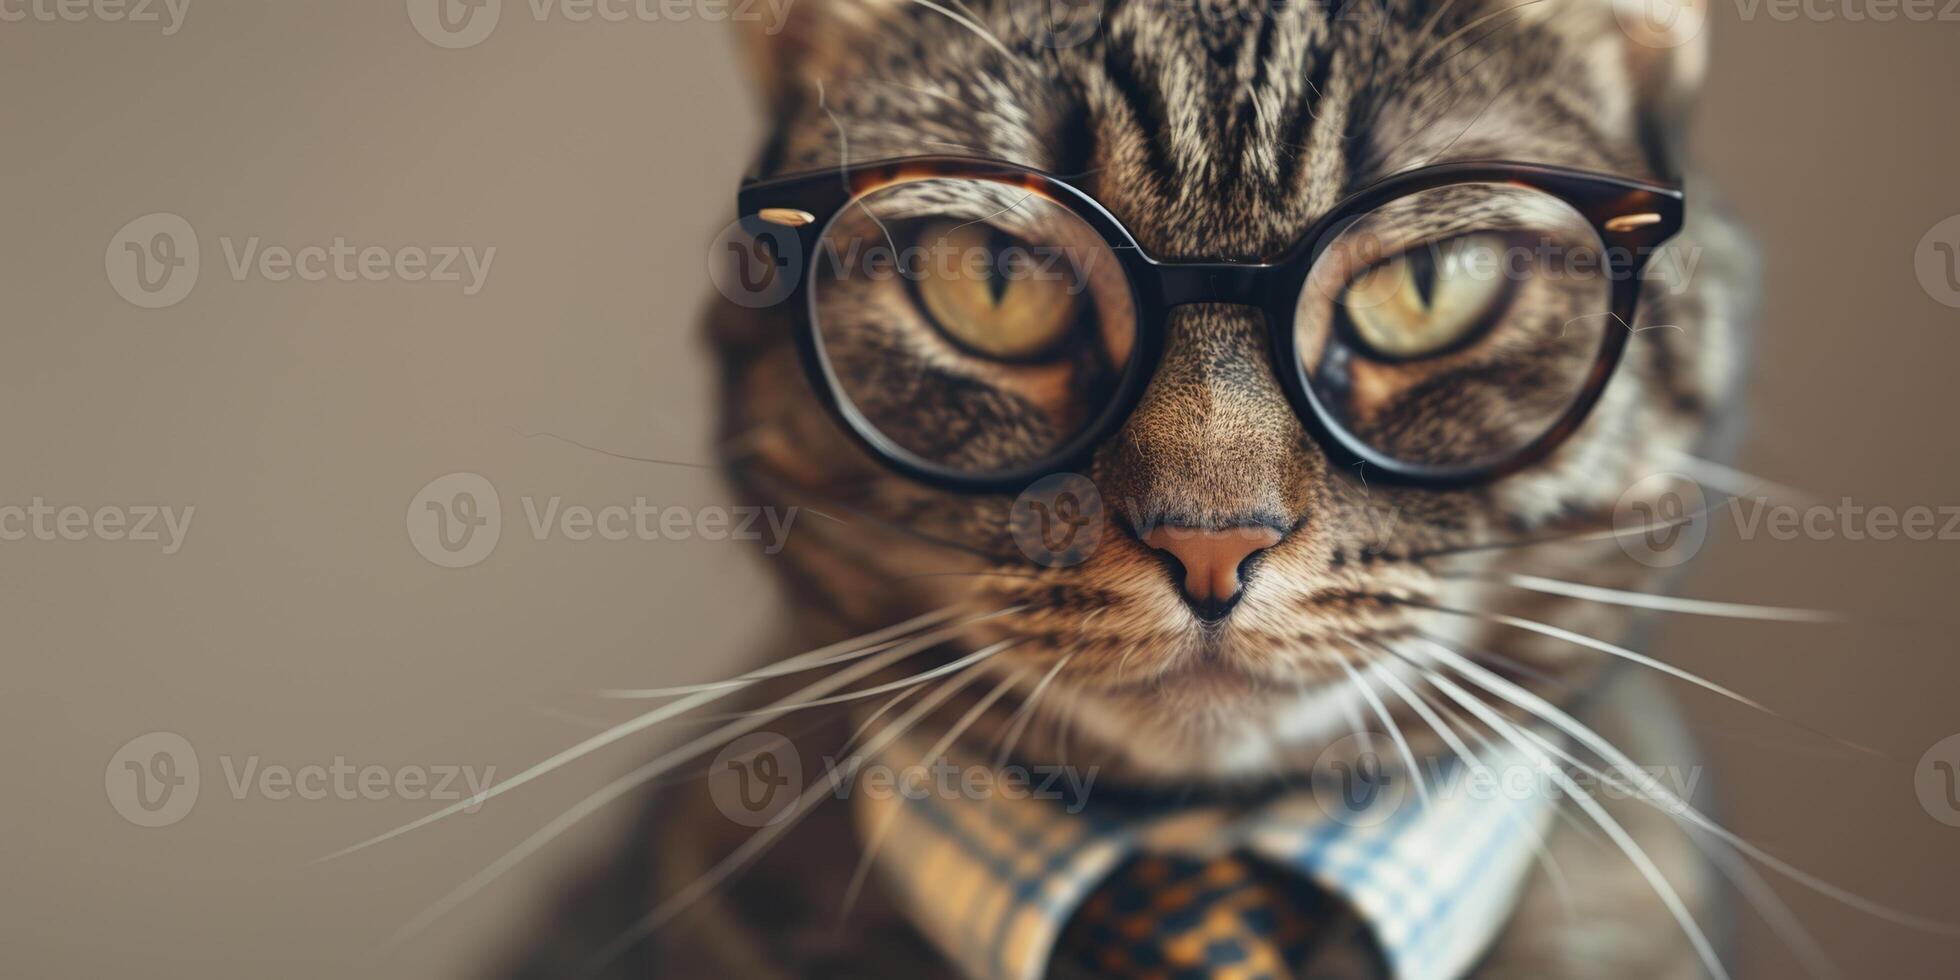 Business cat wearing glasses and a tie on an empty background with copy space photo